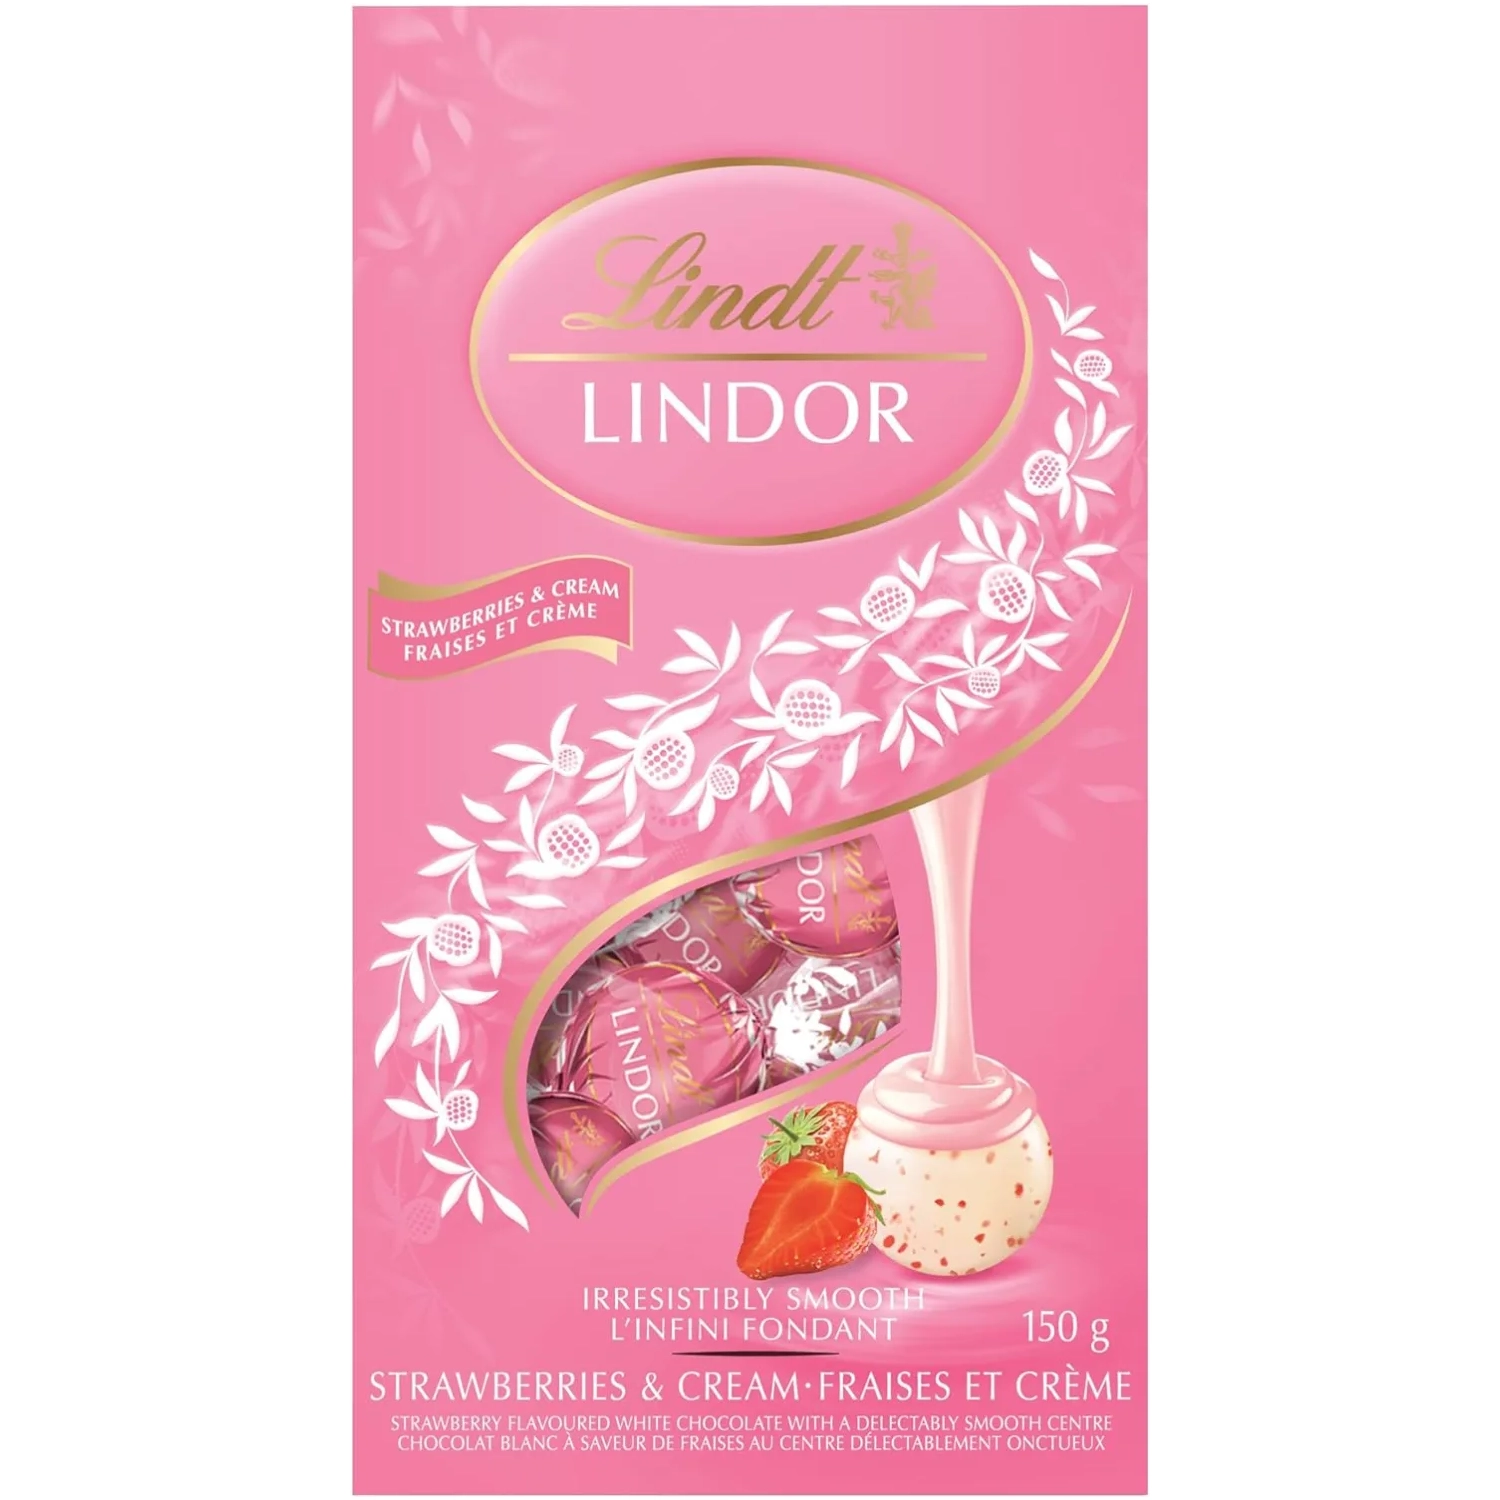 Lindt Lindor Strawberries and Cream White Chocolate Truffles - Irresistible 150g Bag for a Sweet Valentine's Day Treat